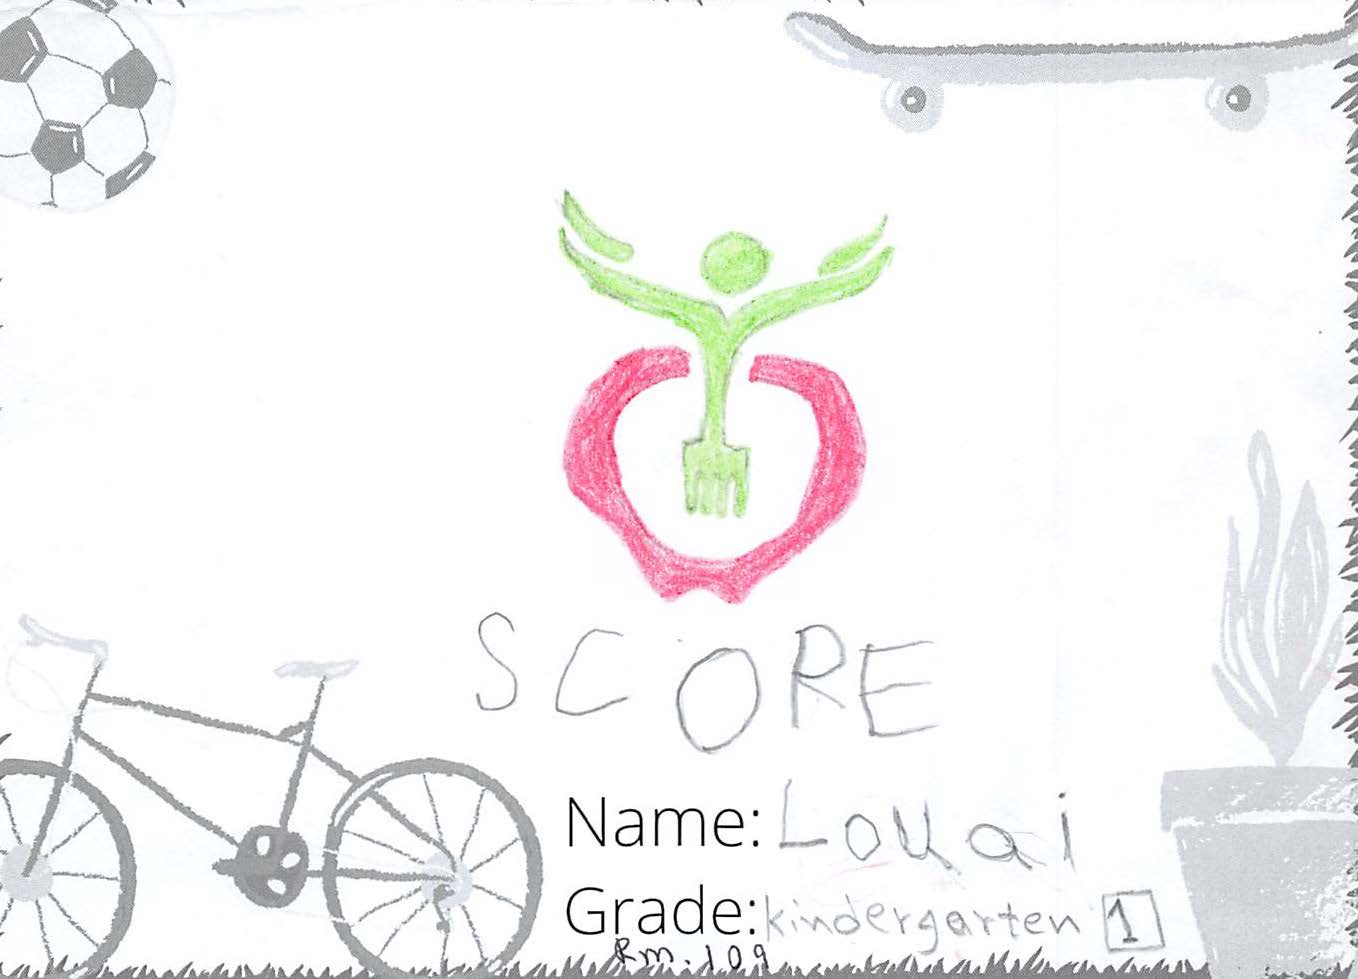 Pencil crayon drawing for the SCORE! logo contest. The drawing includes a red apple with a green stem.